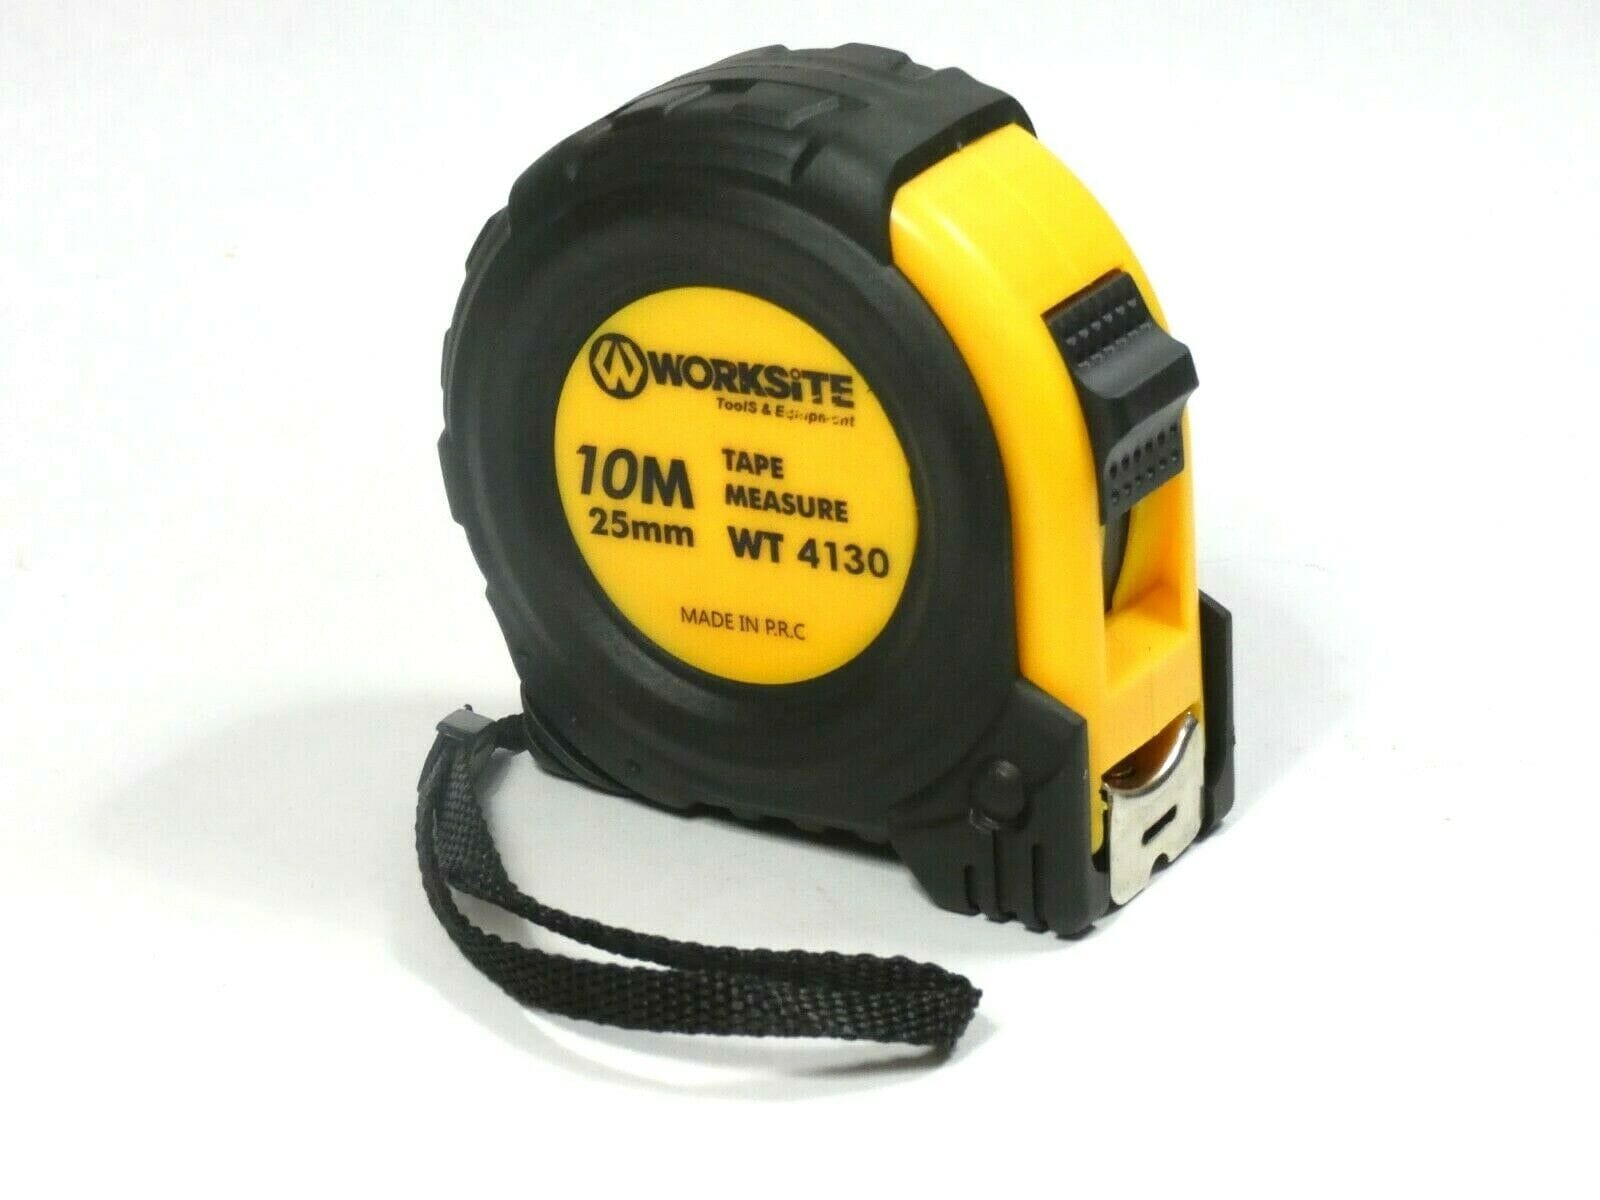 Worksite Tape Measure with Auto Locking 1